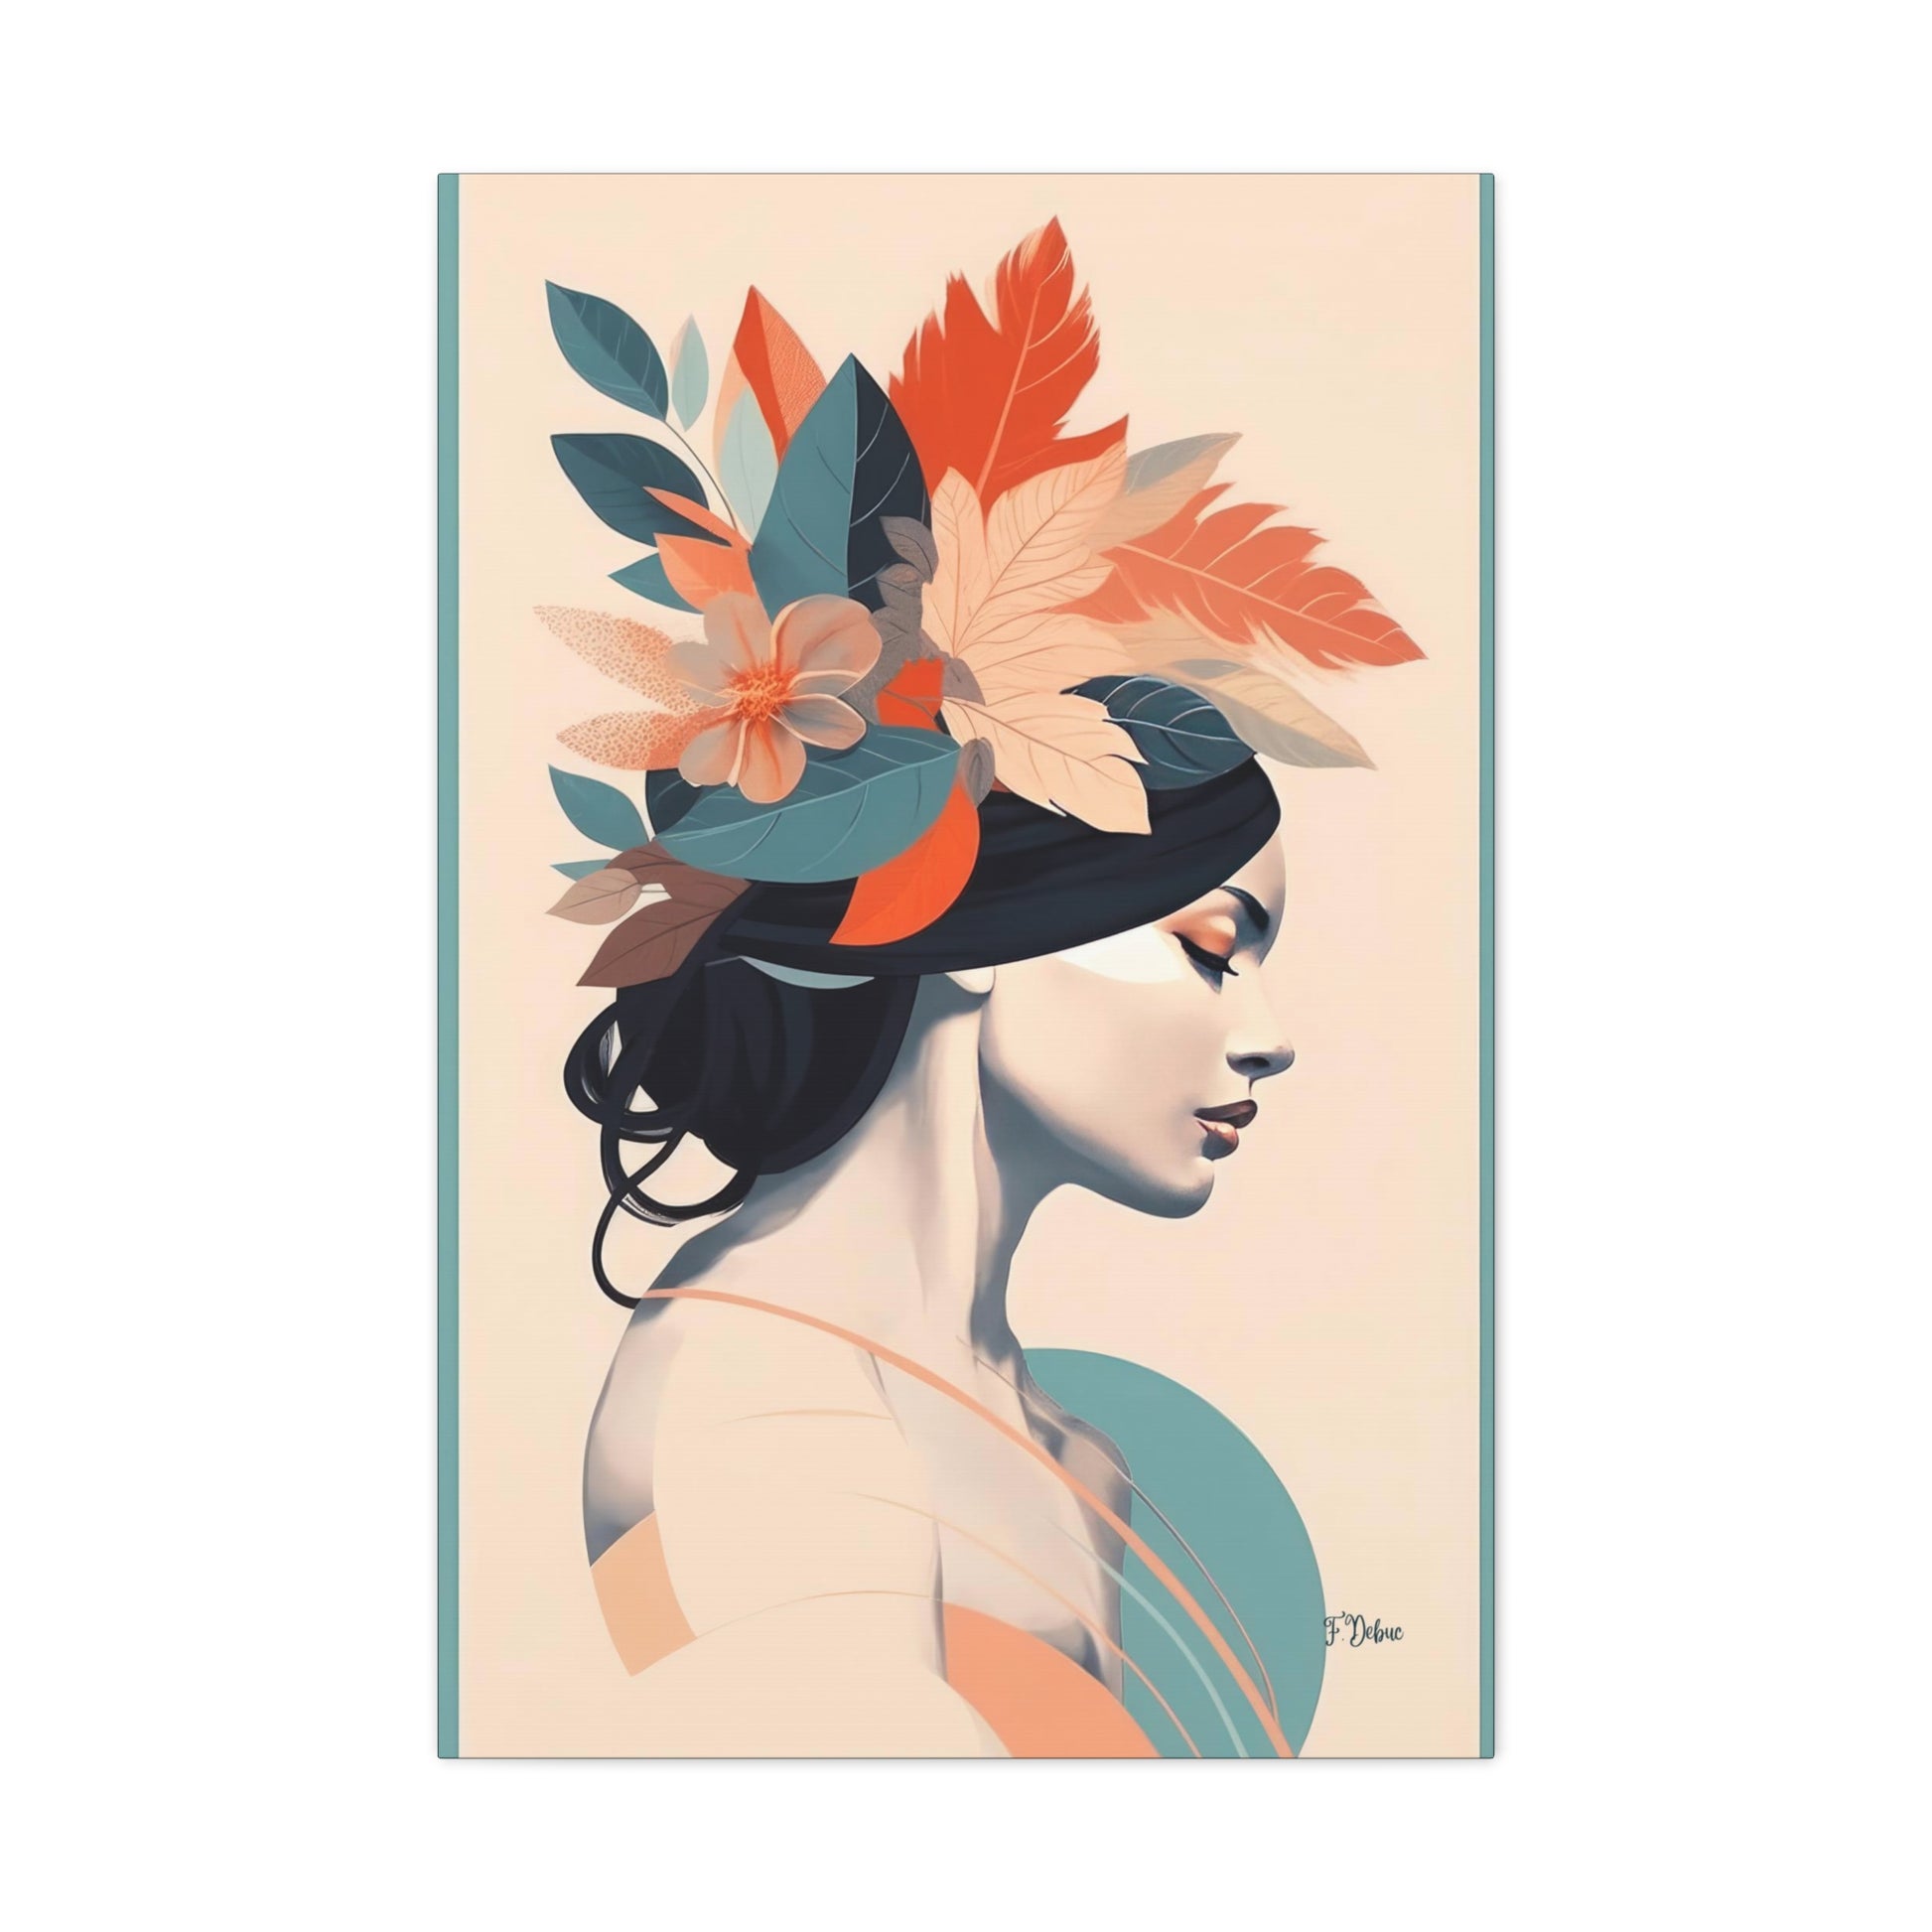 Our print wall art features a woman graced with a leafy crown, a blend of simplicity and elegance.